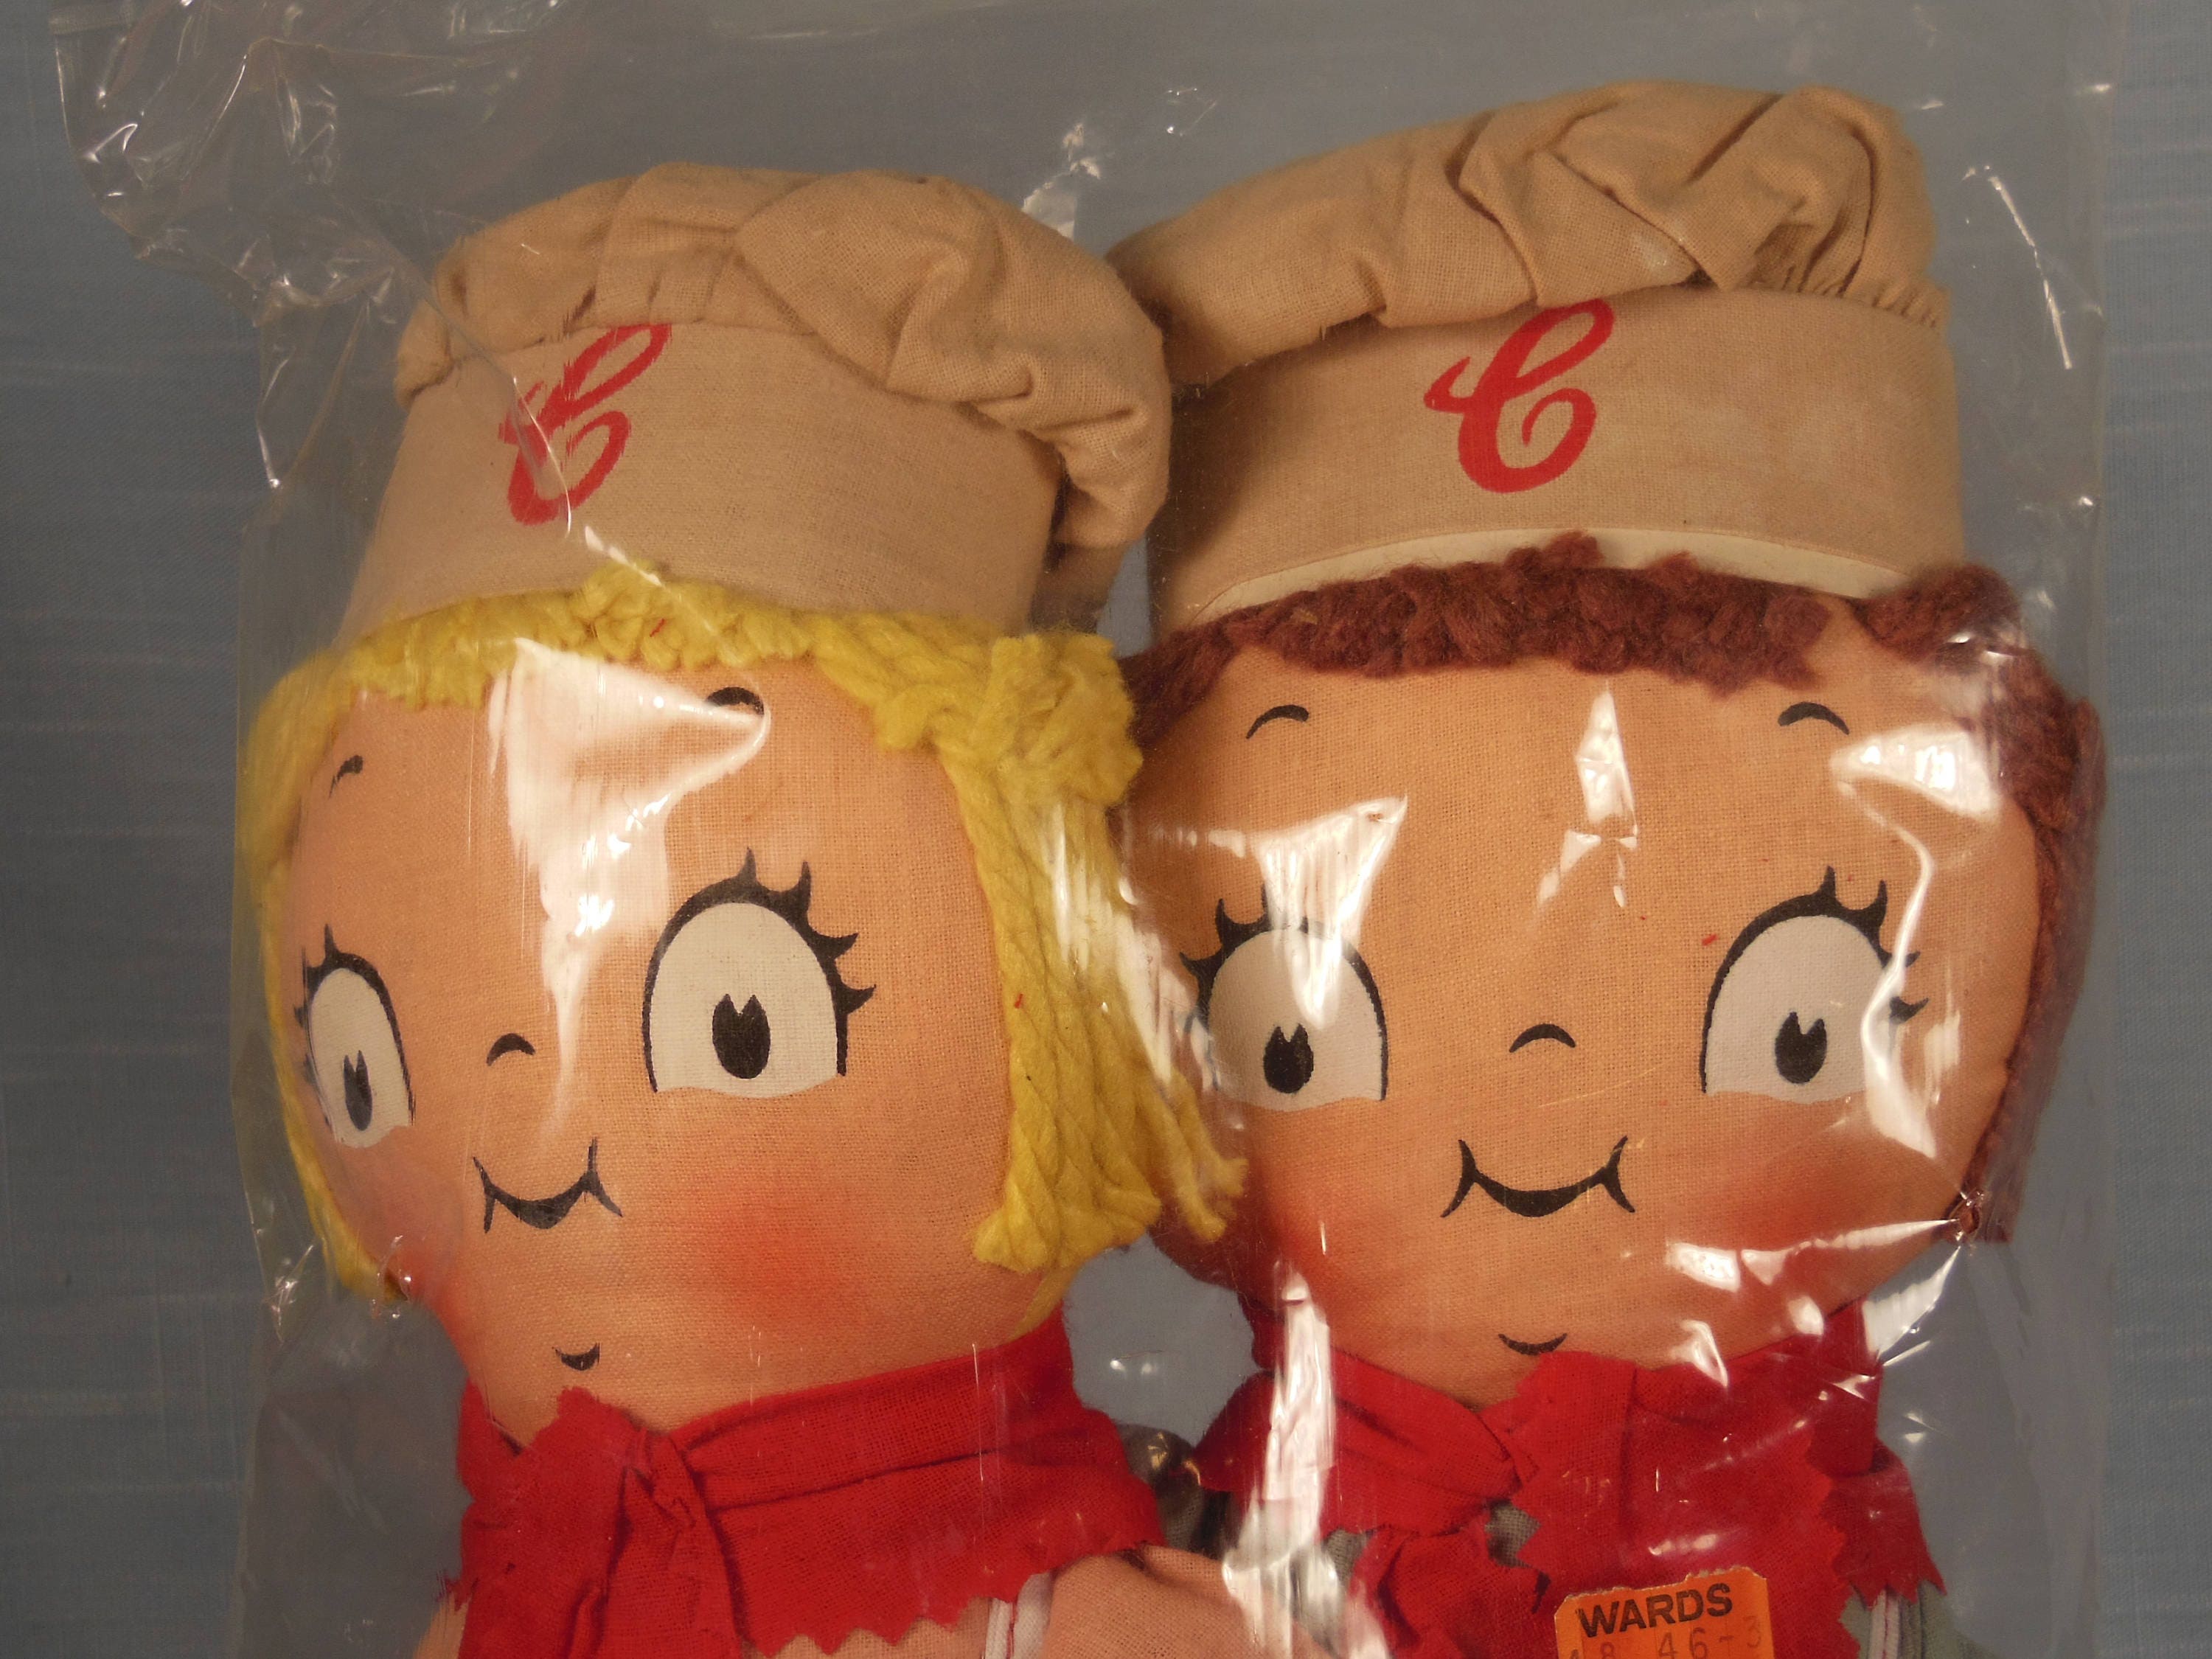 Vintage-1960s-Pair Of Campbell soup Dolls-Sold Only At Montgomery Wards Store-Never Opened